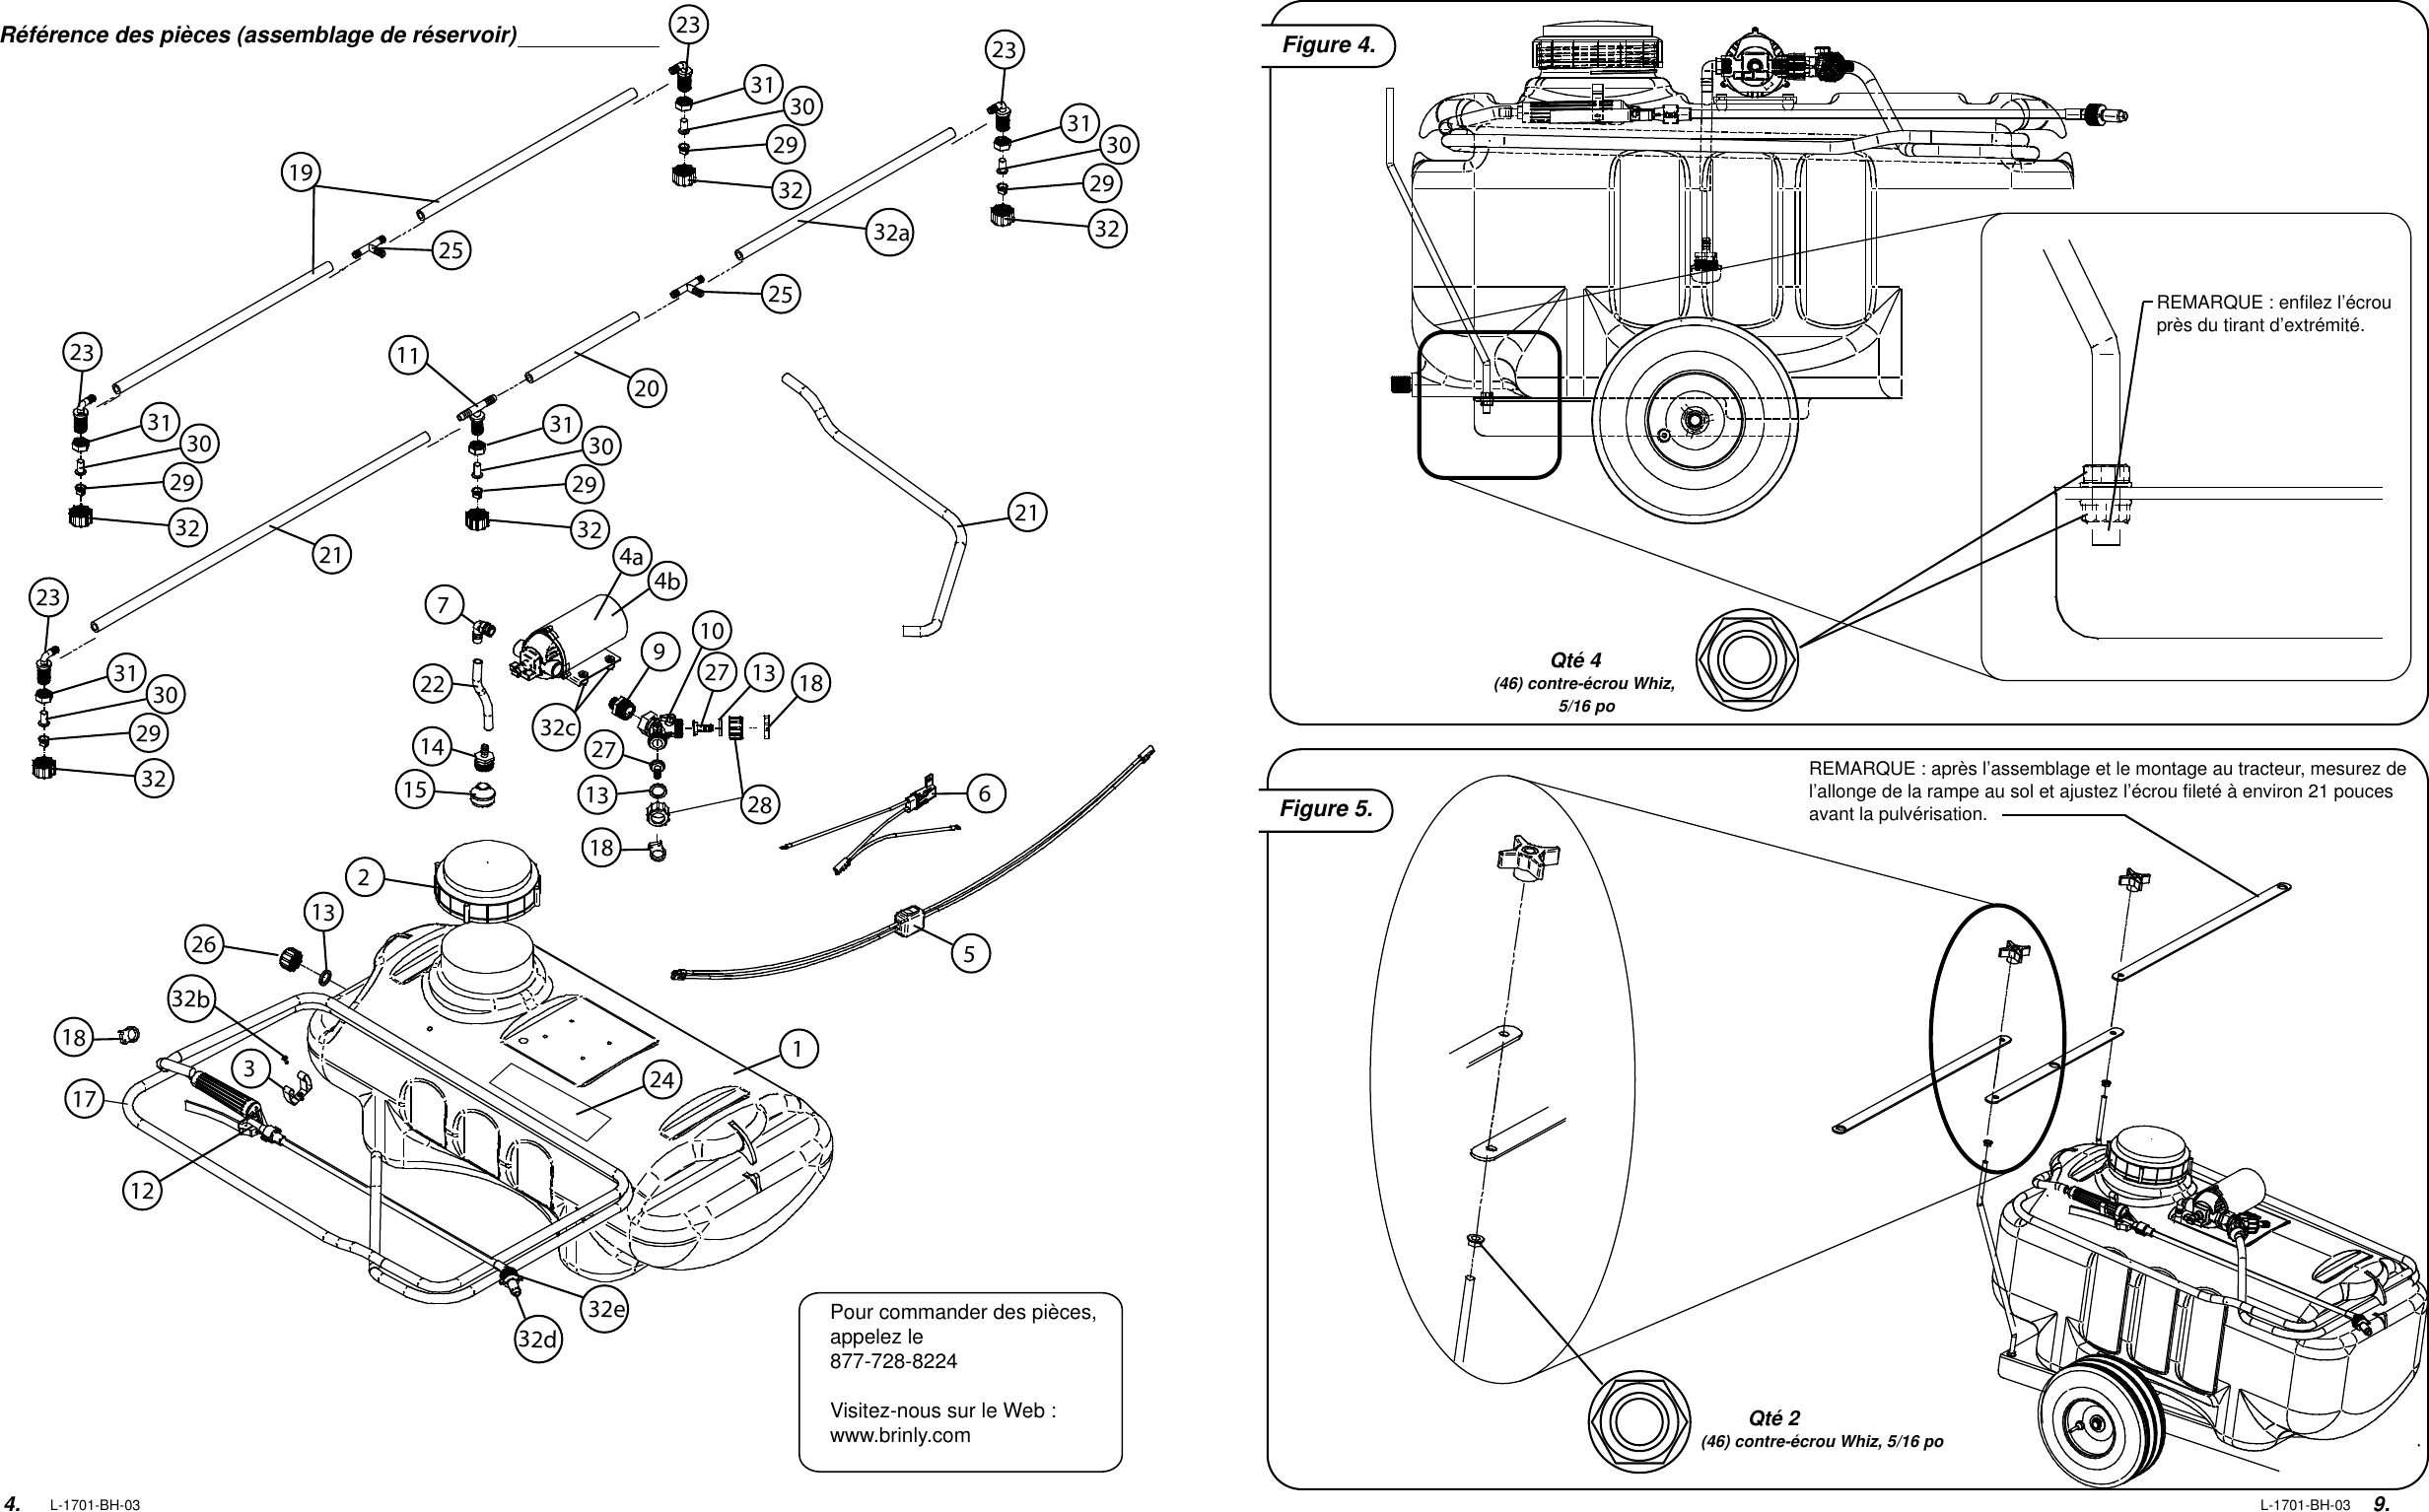 Page 4 of 10 - Brinly-Hardy Brinly-Hardy-Brinly-Hardy-Lawn-Aerator-15-And-25-Gallon-Tow-Behind-Lawn-Sprayer-Users-Manual- 12-1  Brinly-hardy-brinly-hardy-lawn-aerator-15-and-25-gallon-tow-behind-lawn-sprayer-users-manual